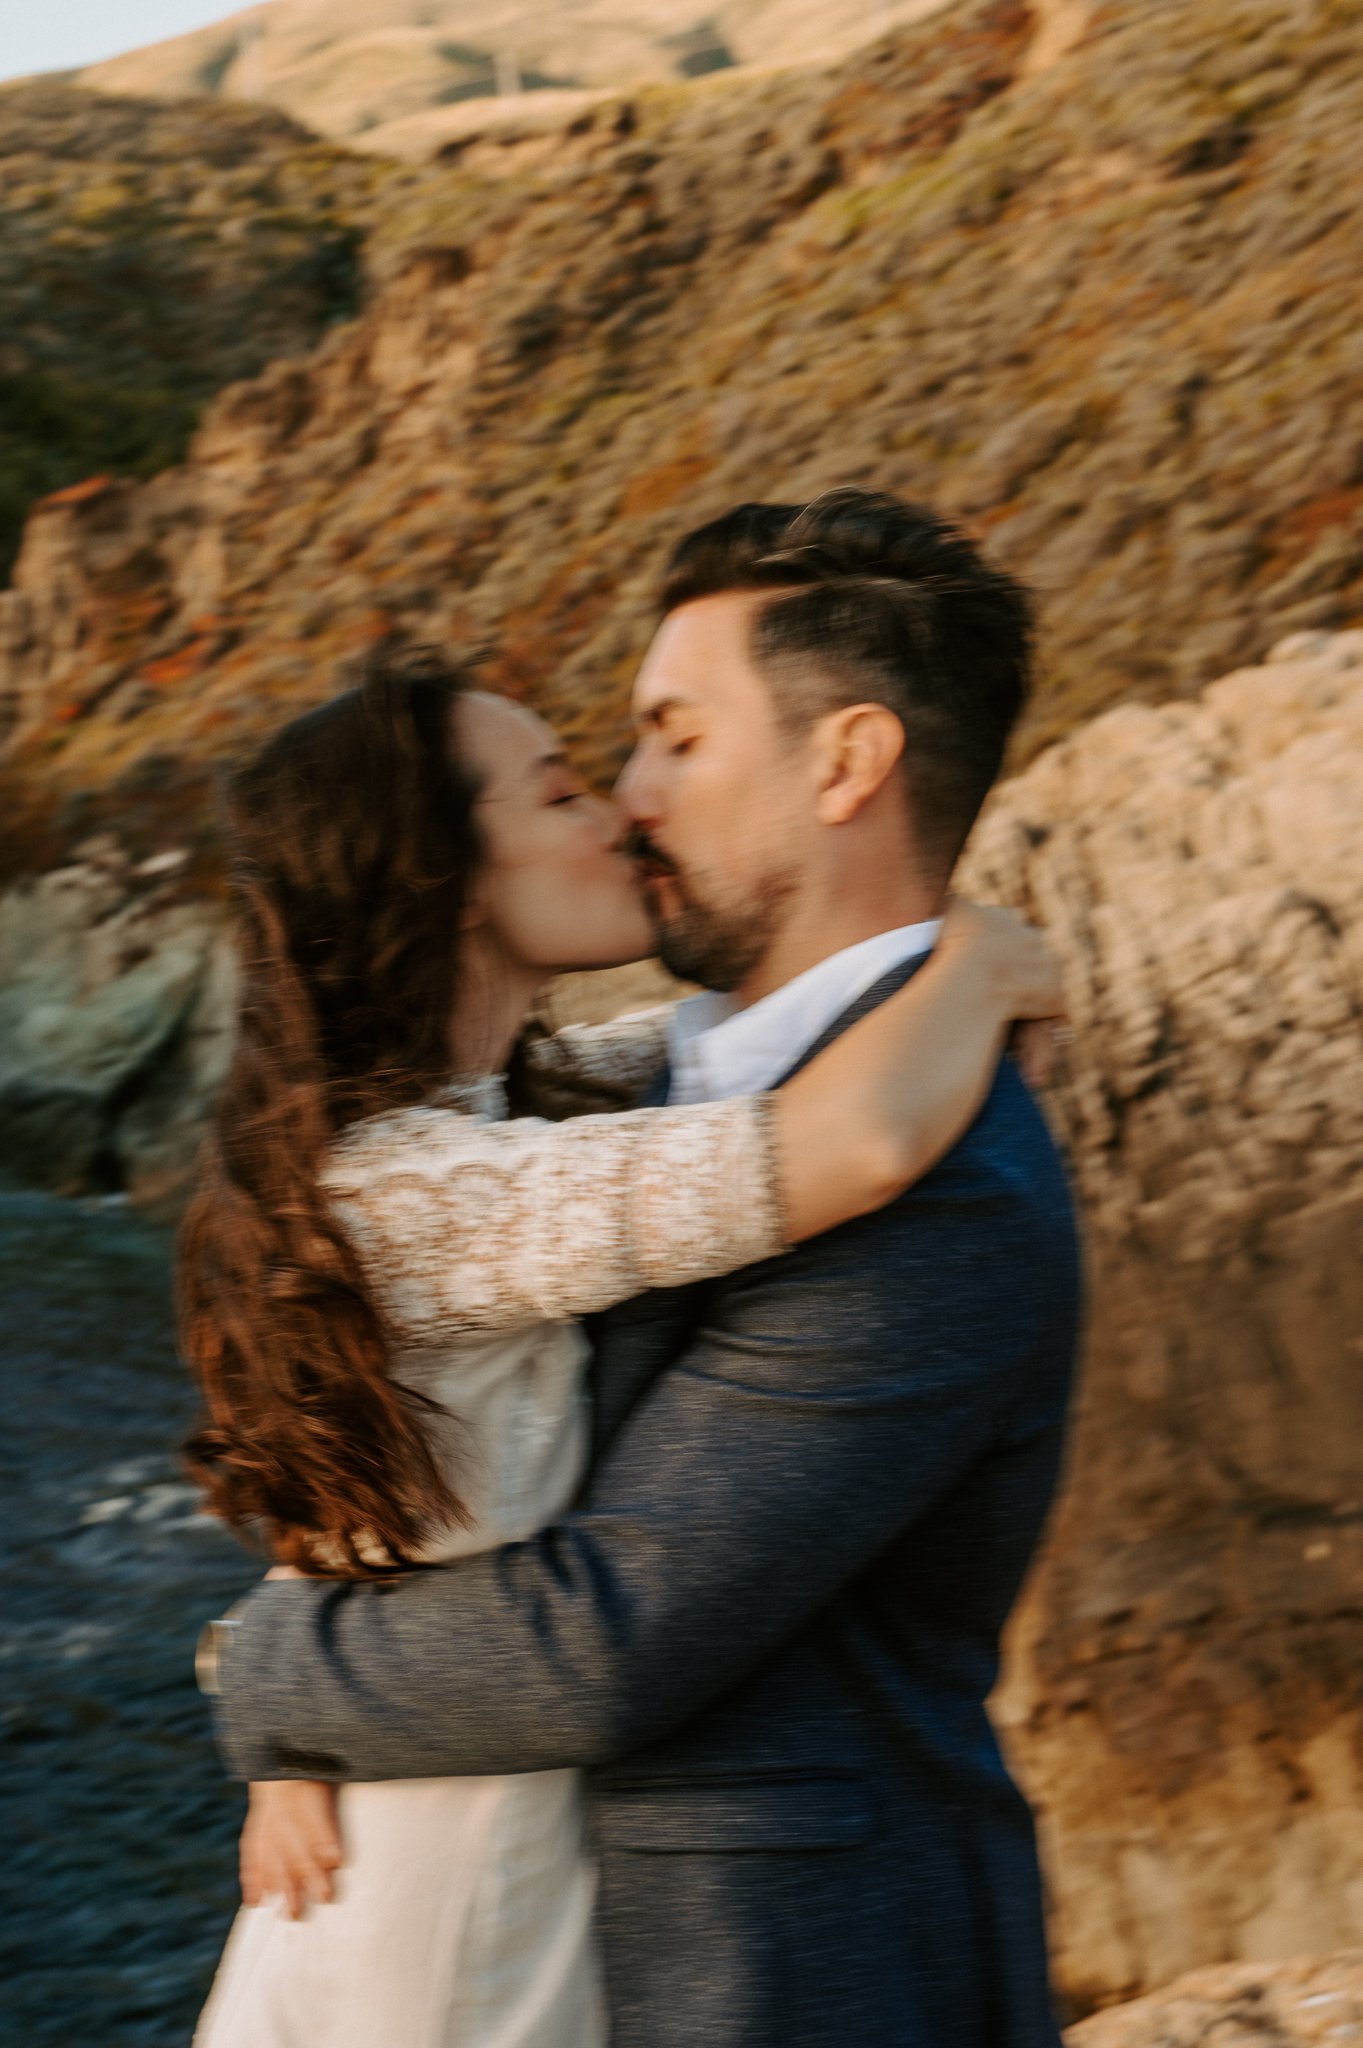 Newly engaged couple kissing on hillside Big Sur, California 